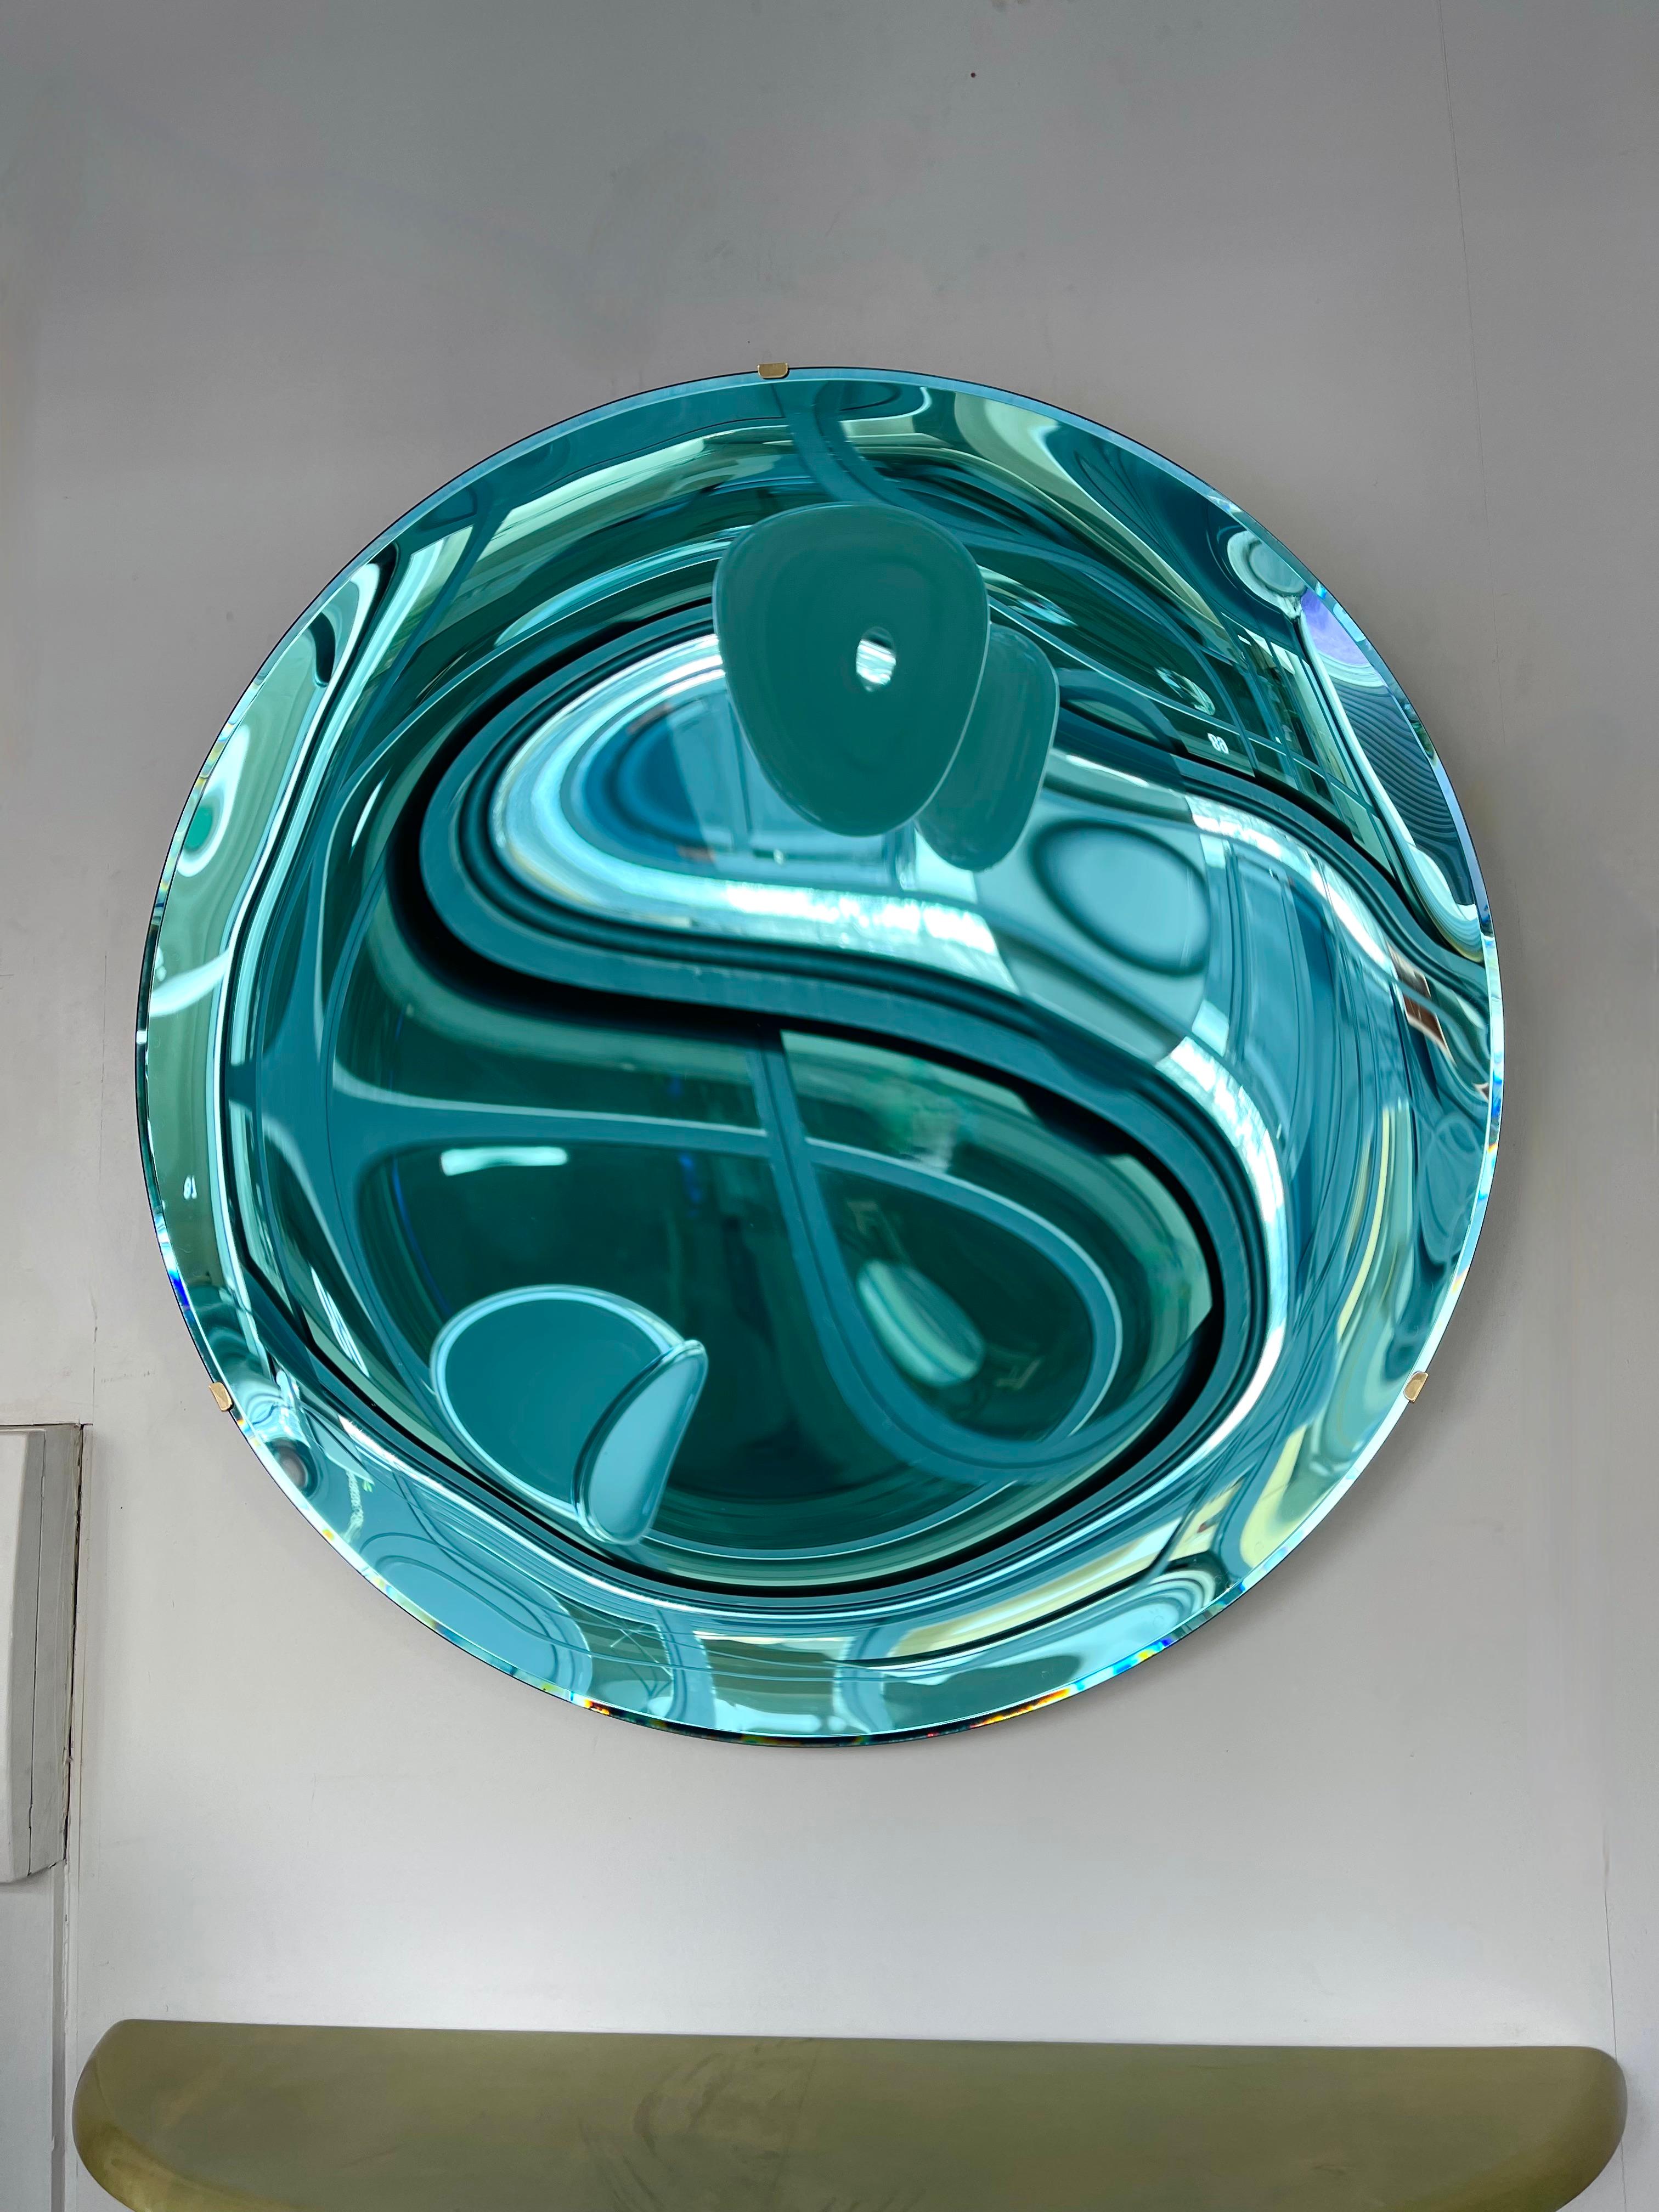 Contemporary curve concave sculpture bleu green acquamarina wall mirror, brass structure. Artisanal handmade work made by a small italian design workshop using the old style mercurization technic.

standart diameter dimensions indicated in